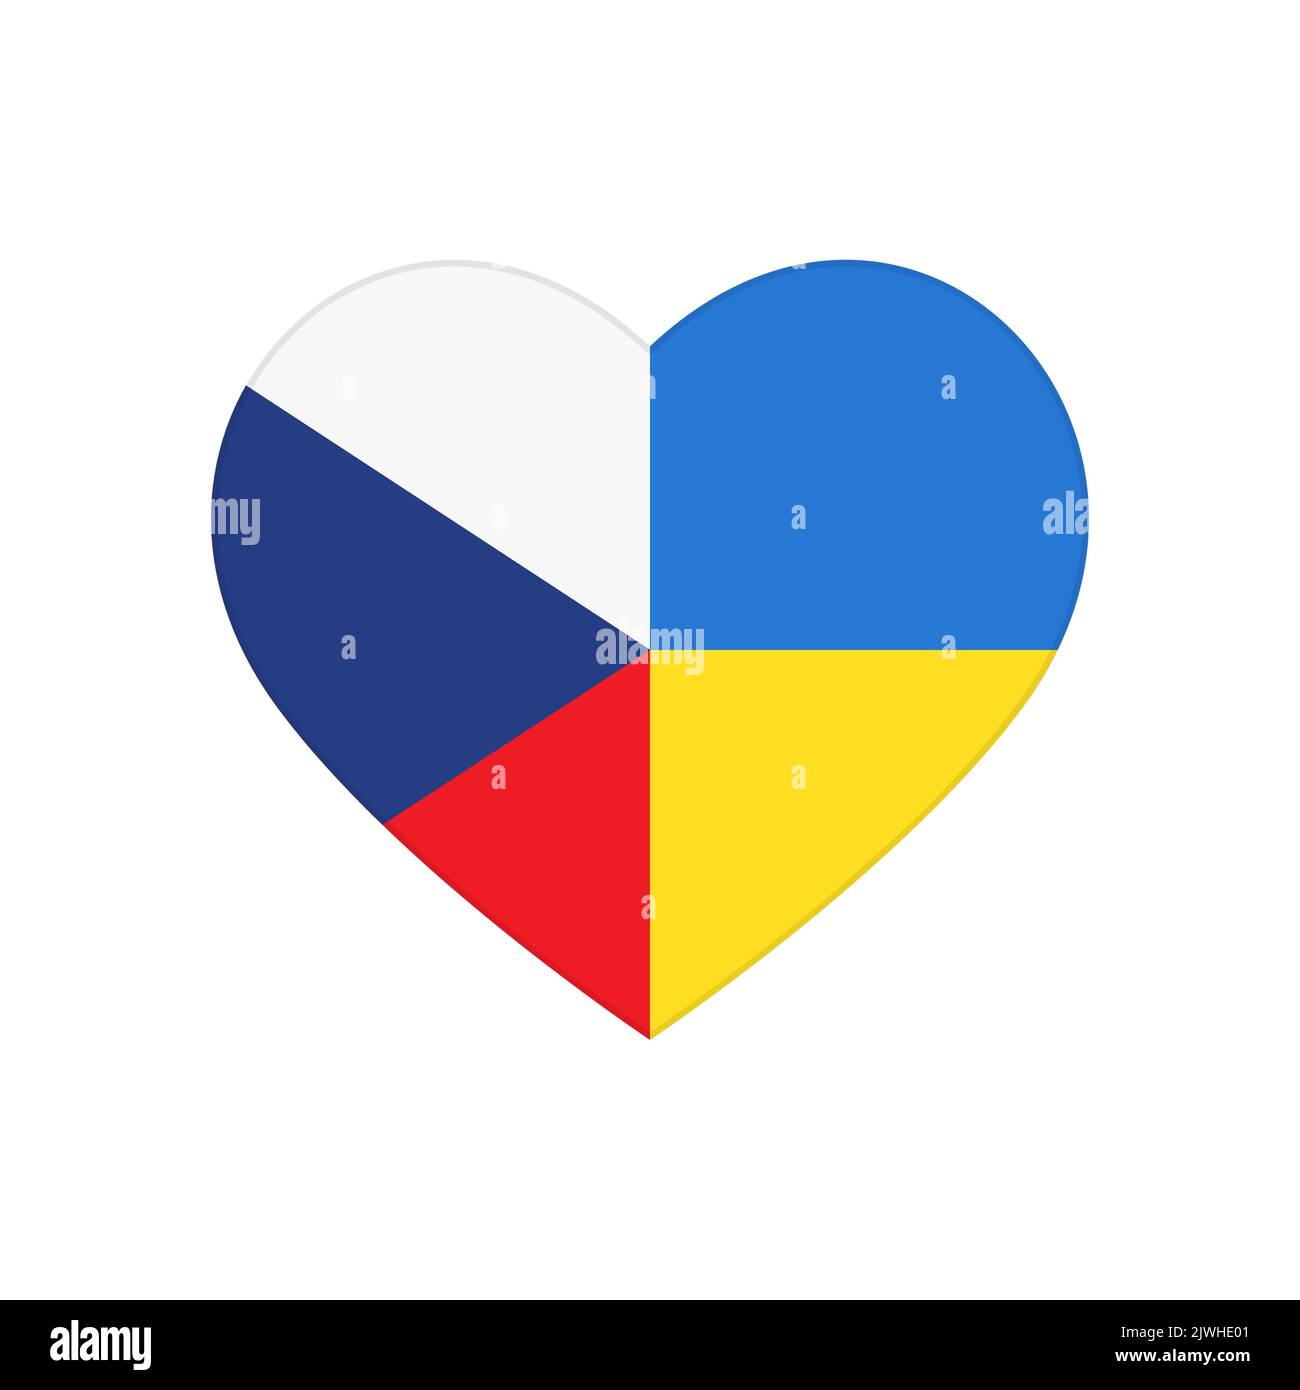 Heart puzzle pieces of Czech Republic and Ukraine flags. Partnership, friendship and support of Czech people and government for Ukrainian citizens and army, symbol of love and peace between nations Stock Vector